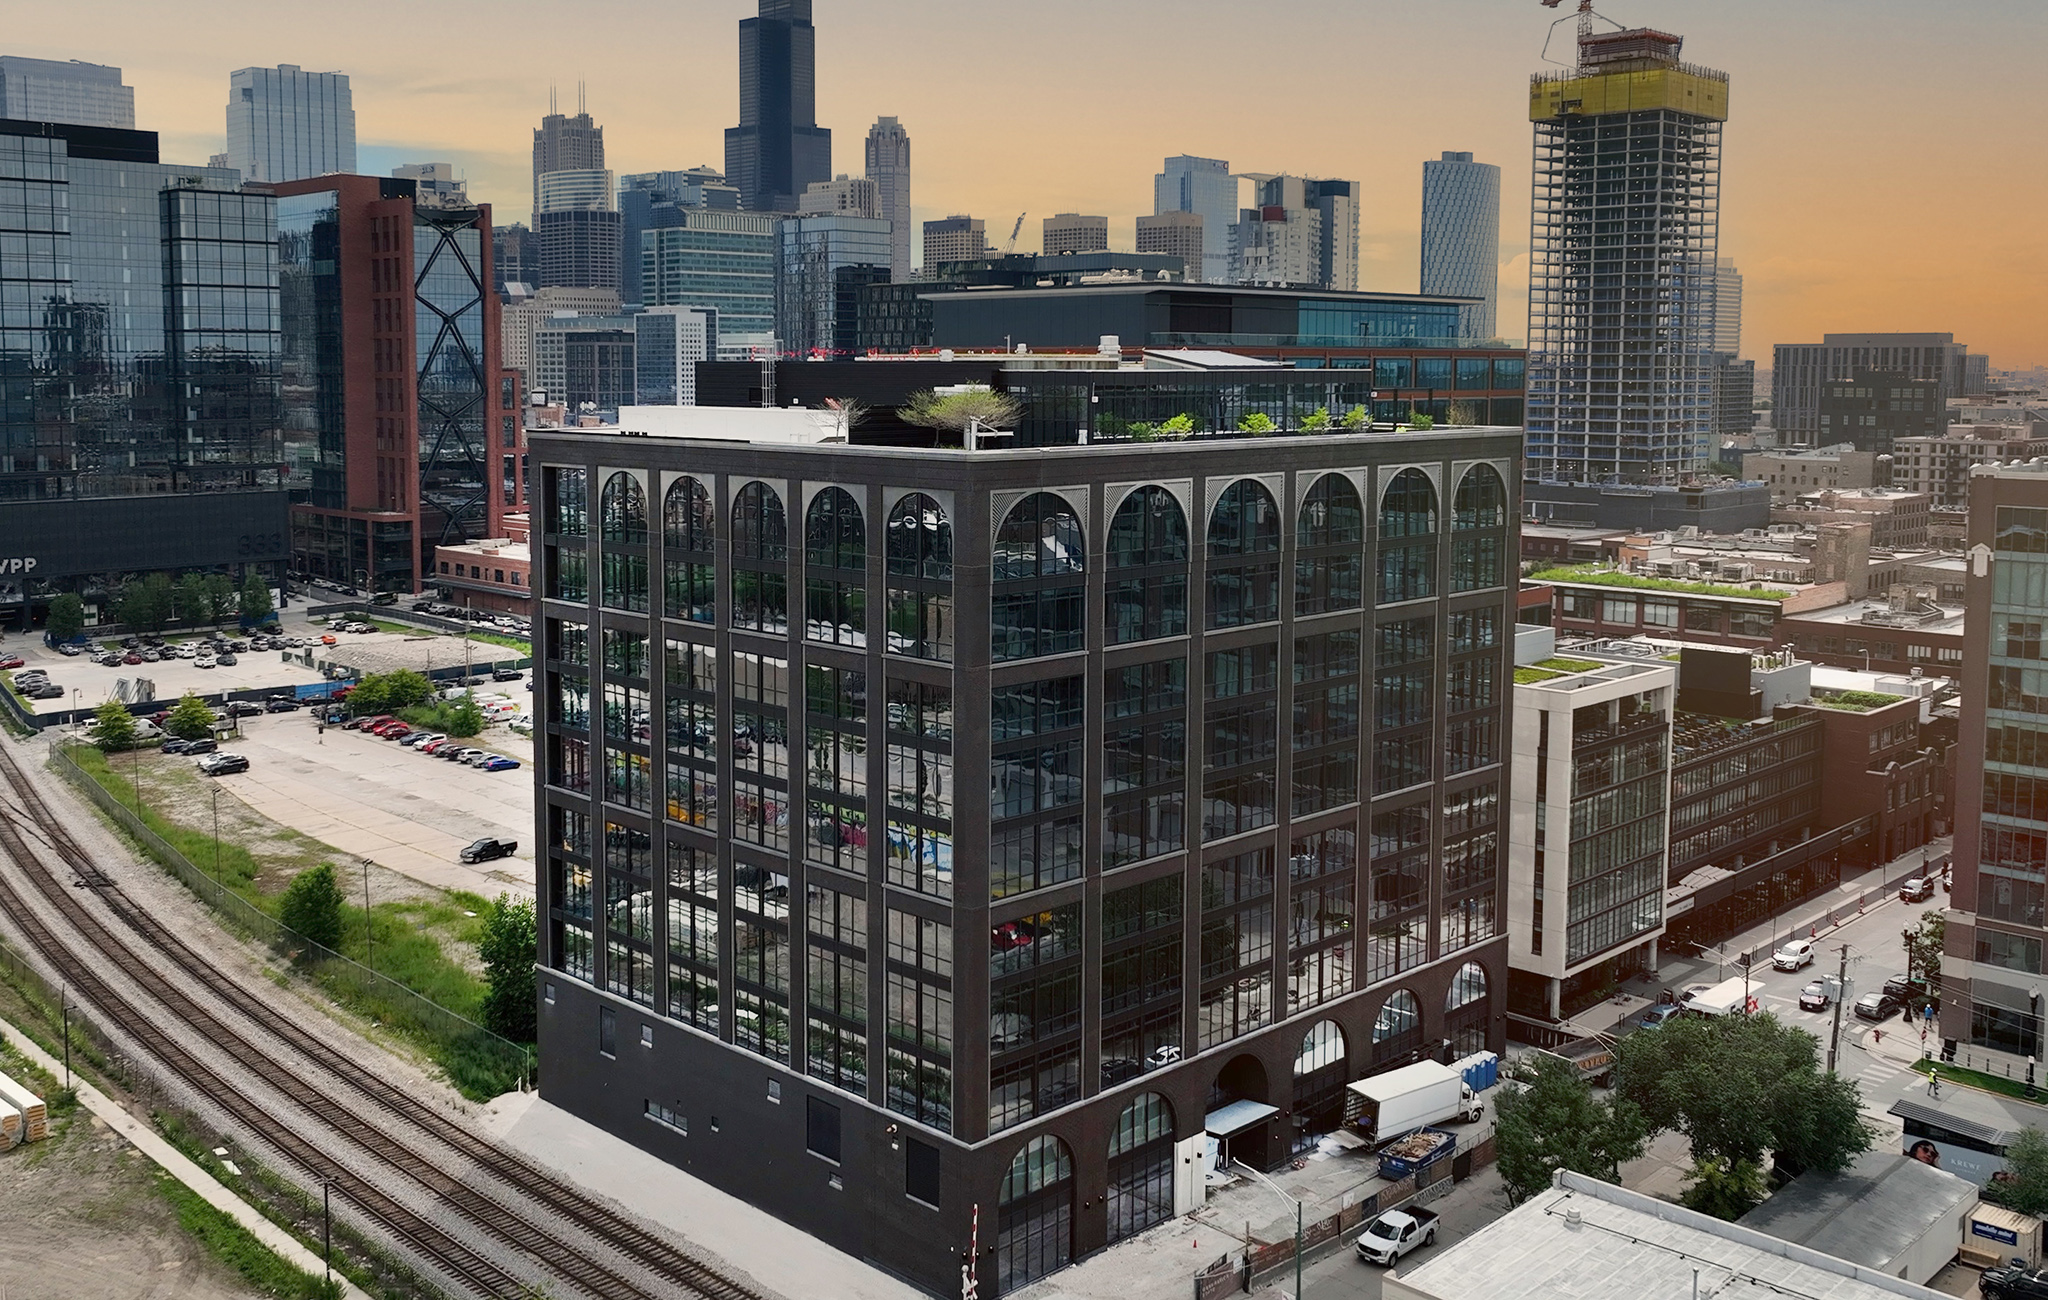 Skender Completes Construction of 345 N Morgan, a New Office and Retail Development by Sterling Bay